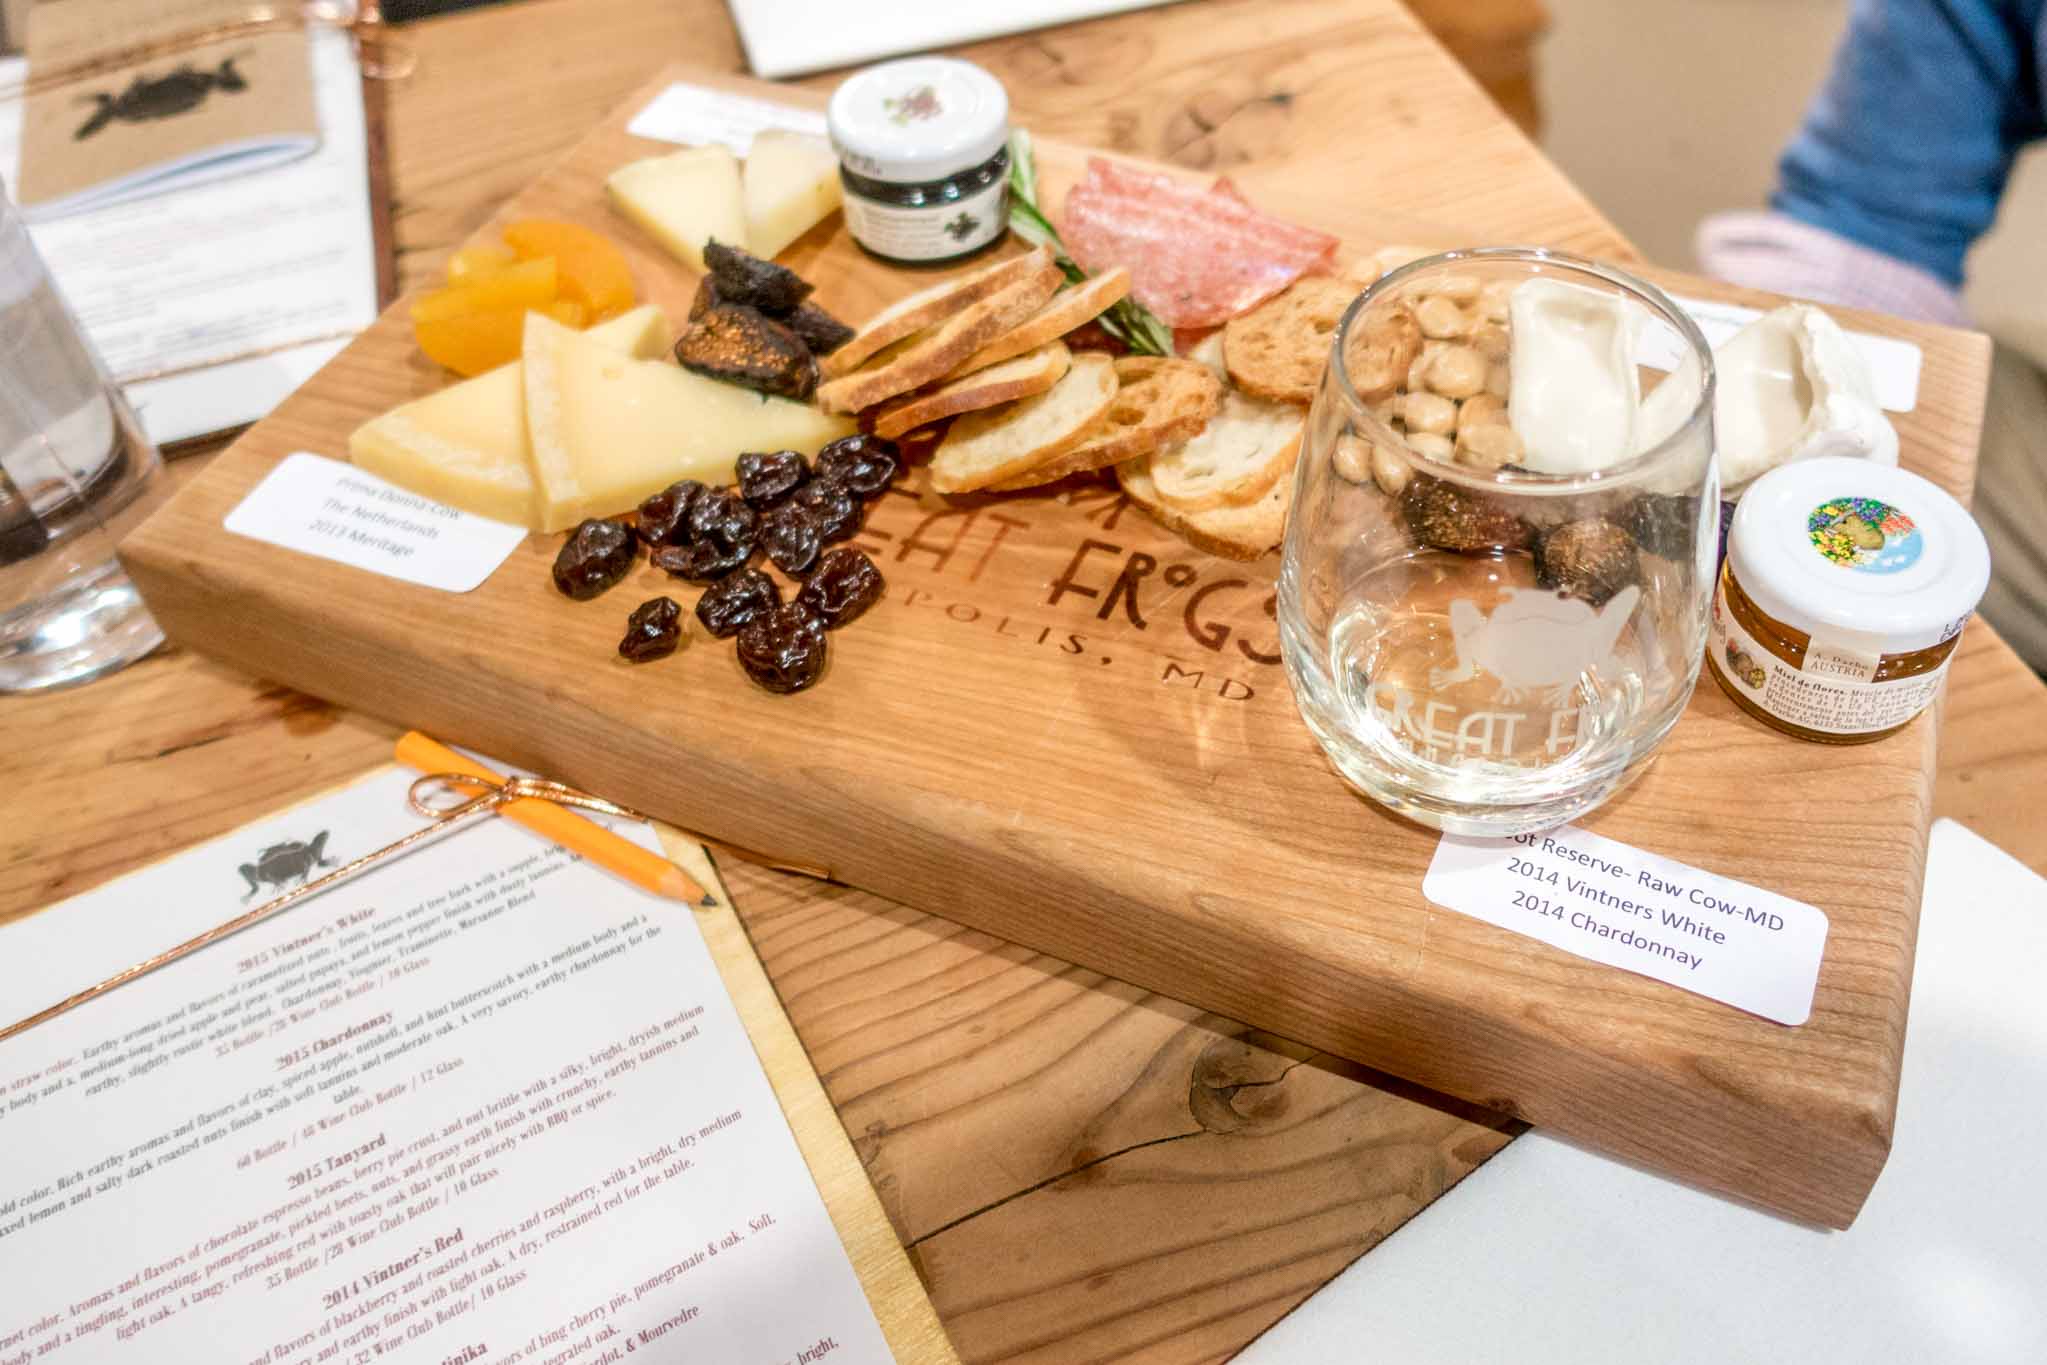 Foods for wine and cheese pairing at Great Frogs Winery